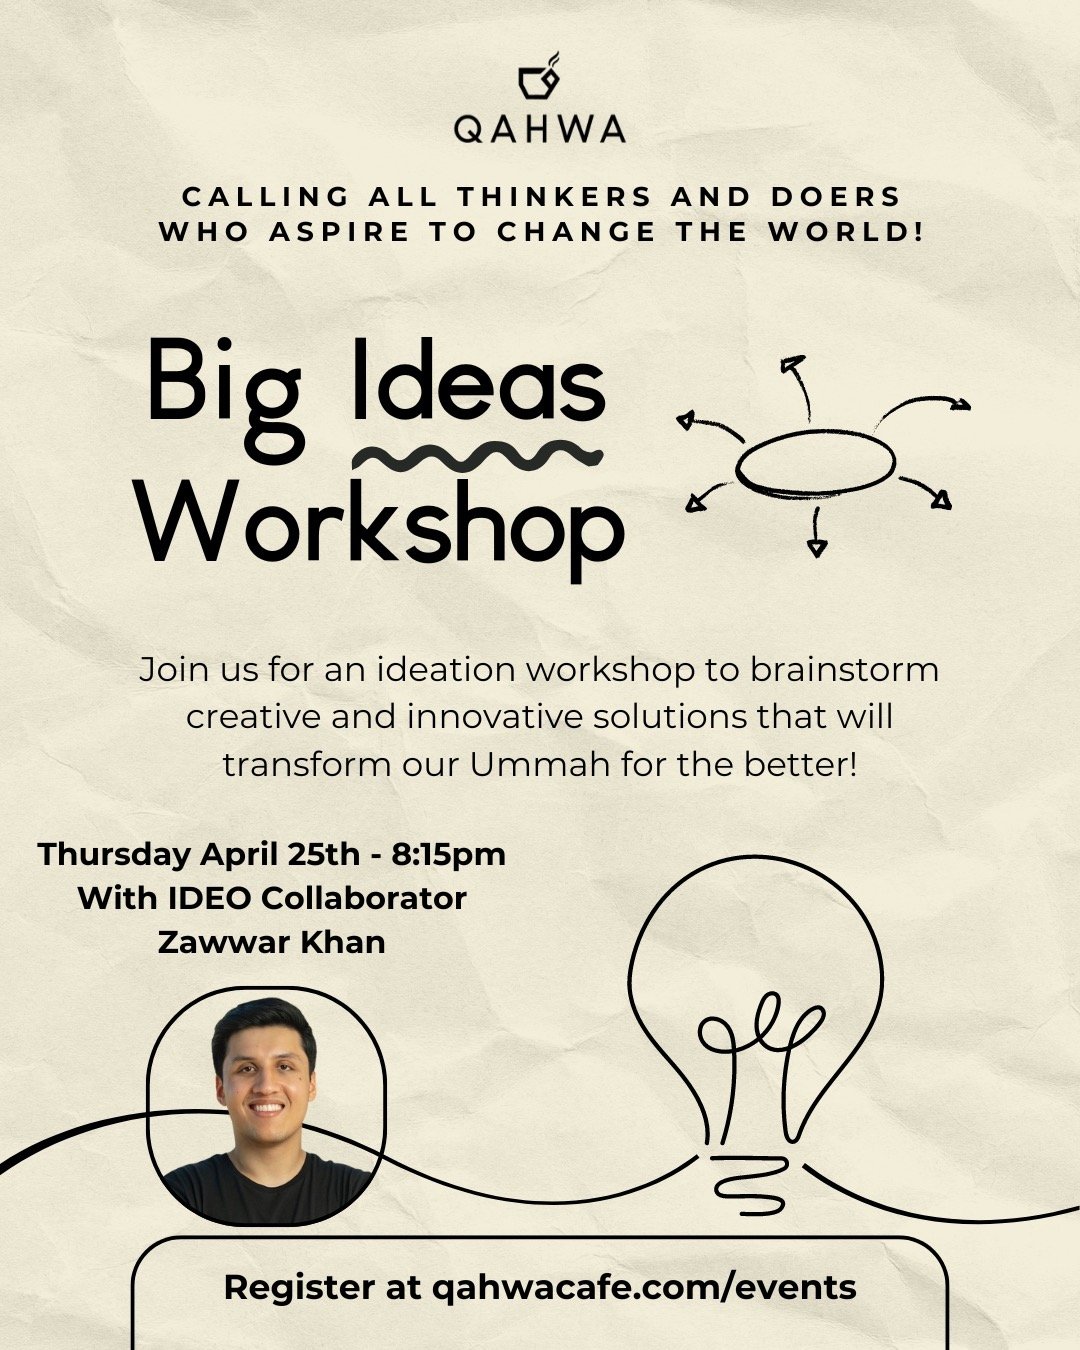 The Grounding is still on break next week but it&rsquo;s place we&rsquo;ll be hosting an Ideation Workshop led by former Innovation Manager &amp; IDEO Collaborator Zawwar Khan! 💭💡💭

This project was brought to fruition based on popular demand and 